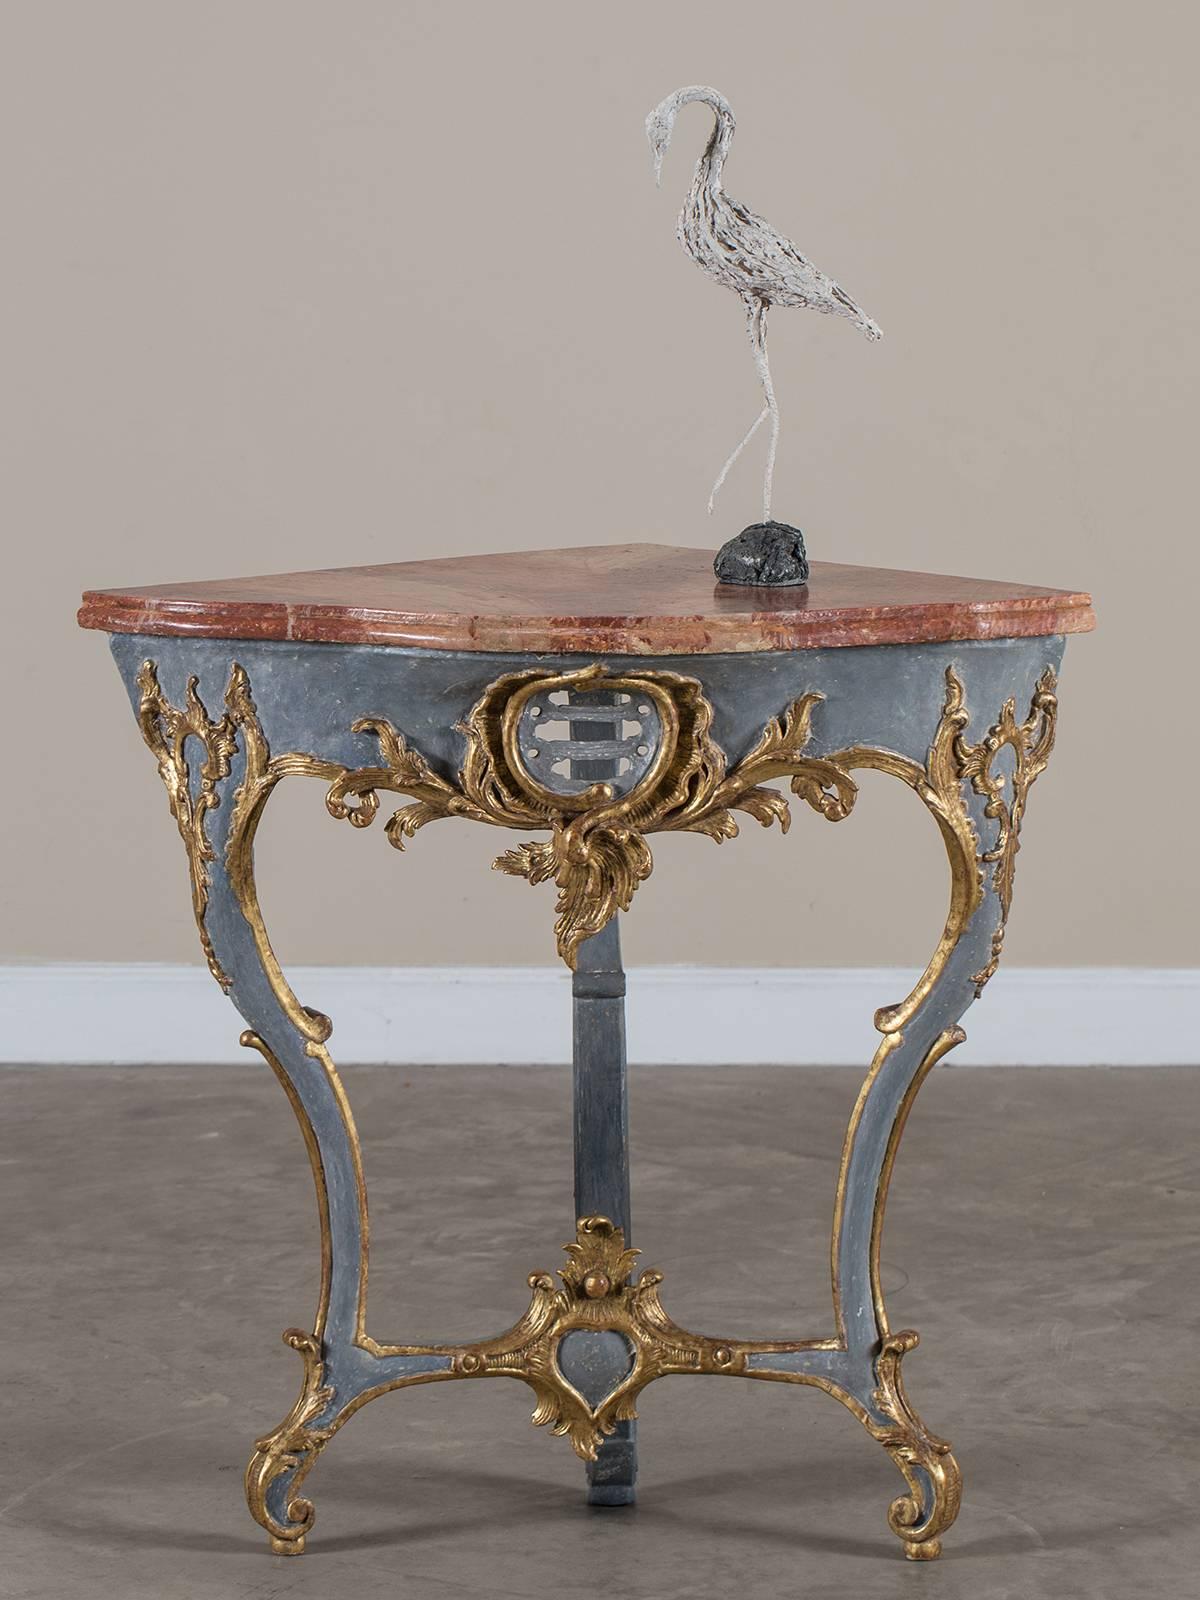 Receive our new selections direct from 1stdibs by email each week. Please click Follow Dealer below and see them first!

The beautiful color and carving on this unusual antique Austrian corner console table highlight its origin from the Rococo